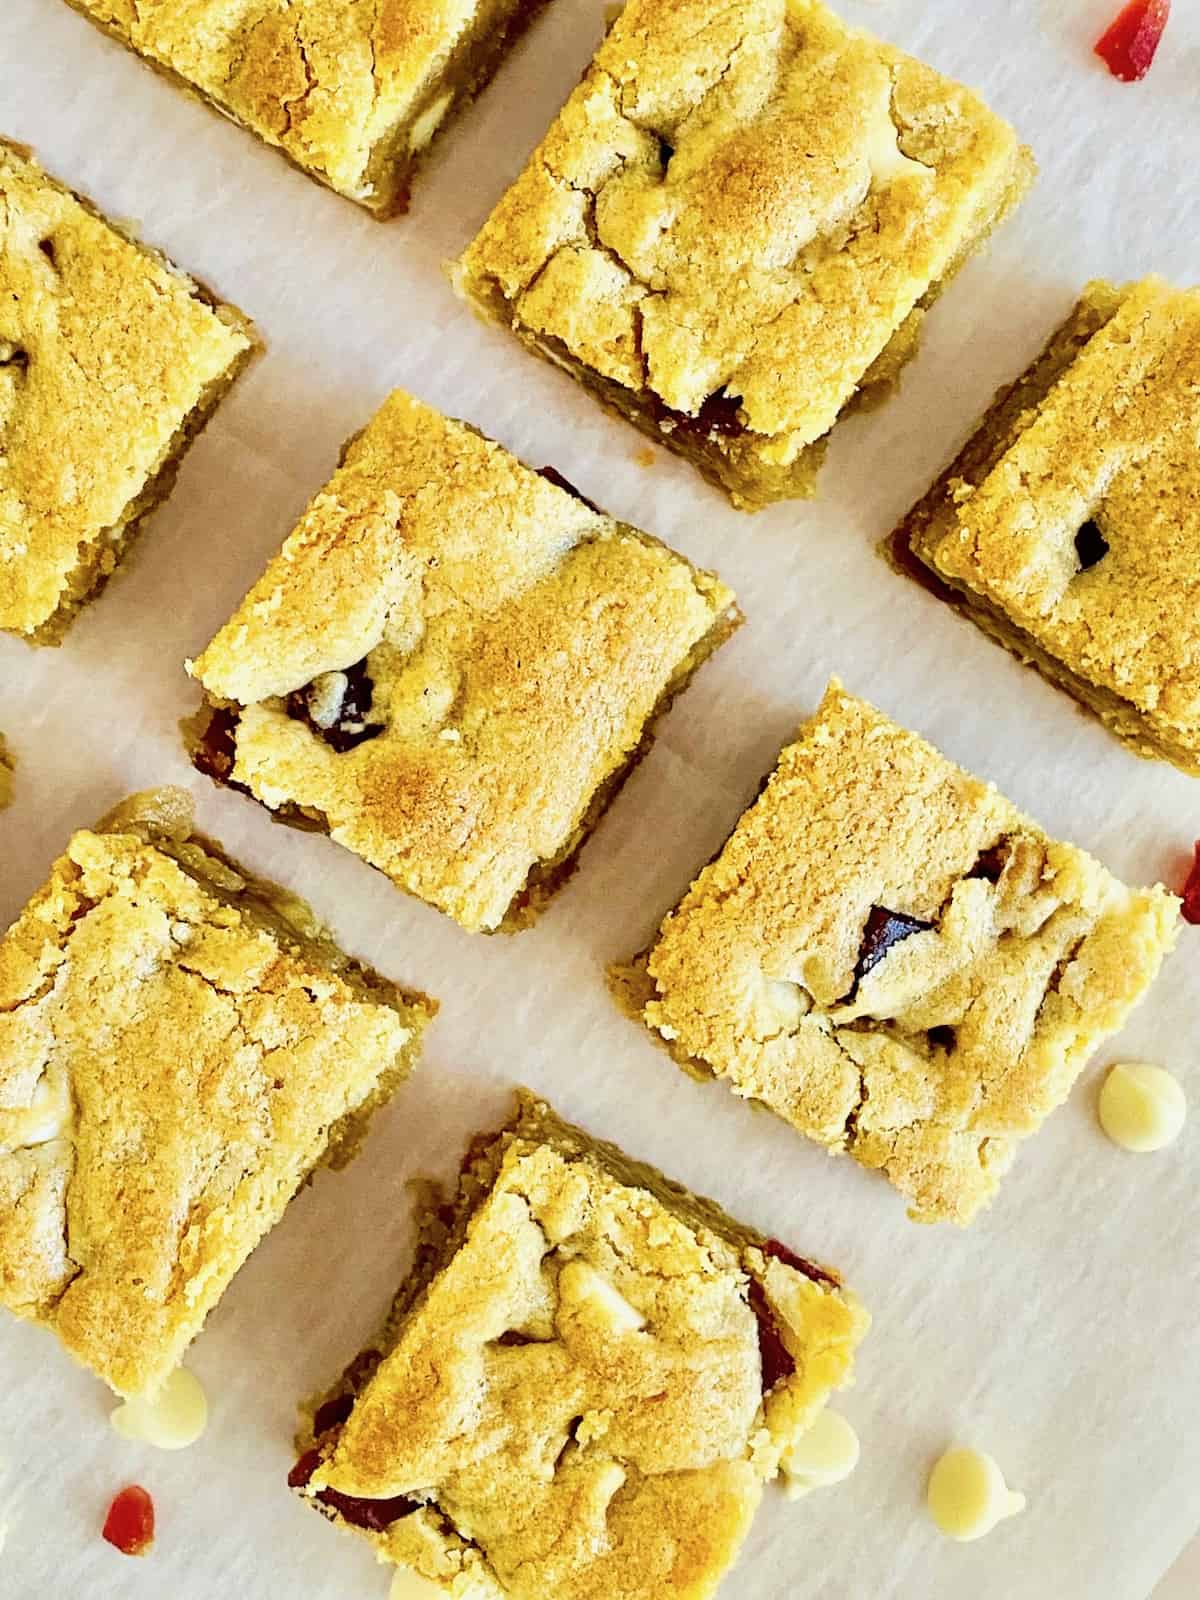 Strawberries & Cream Cookie Bars cut into squares on parchment overhead.